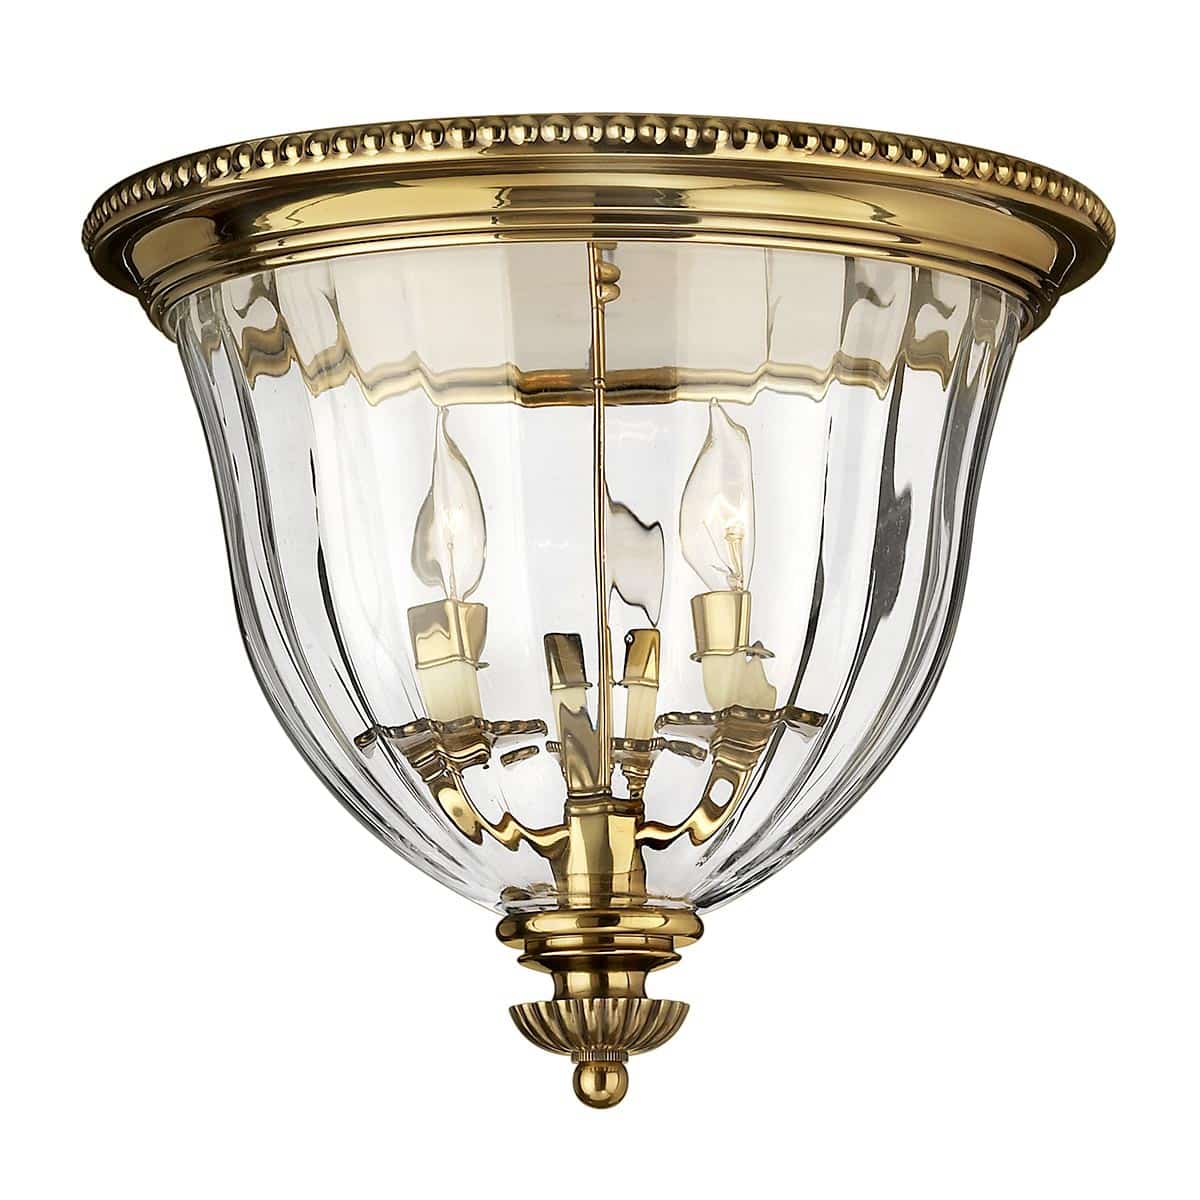 Hinkley Cambridge 3 Lamp Flush Low Ceiling Light Solid Burnished Brass